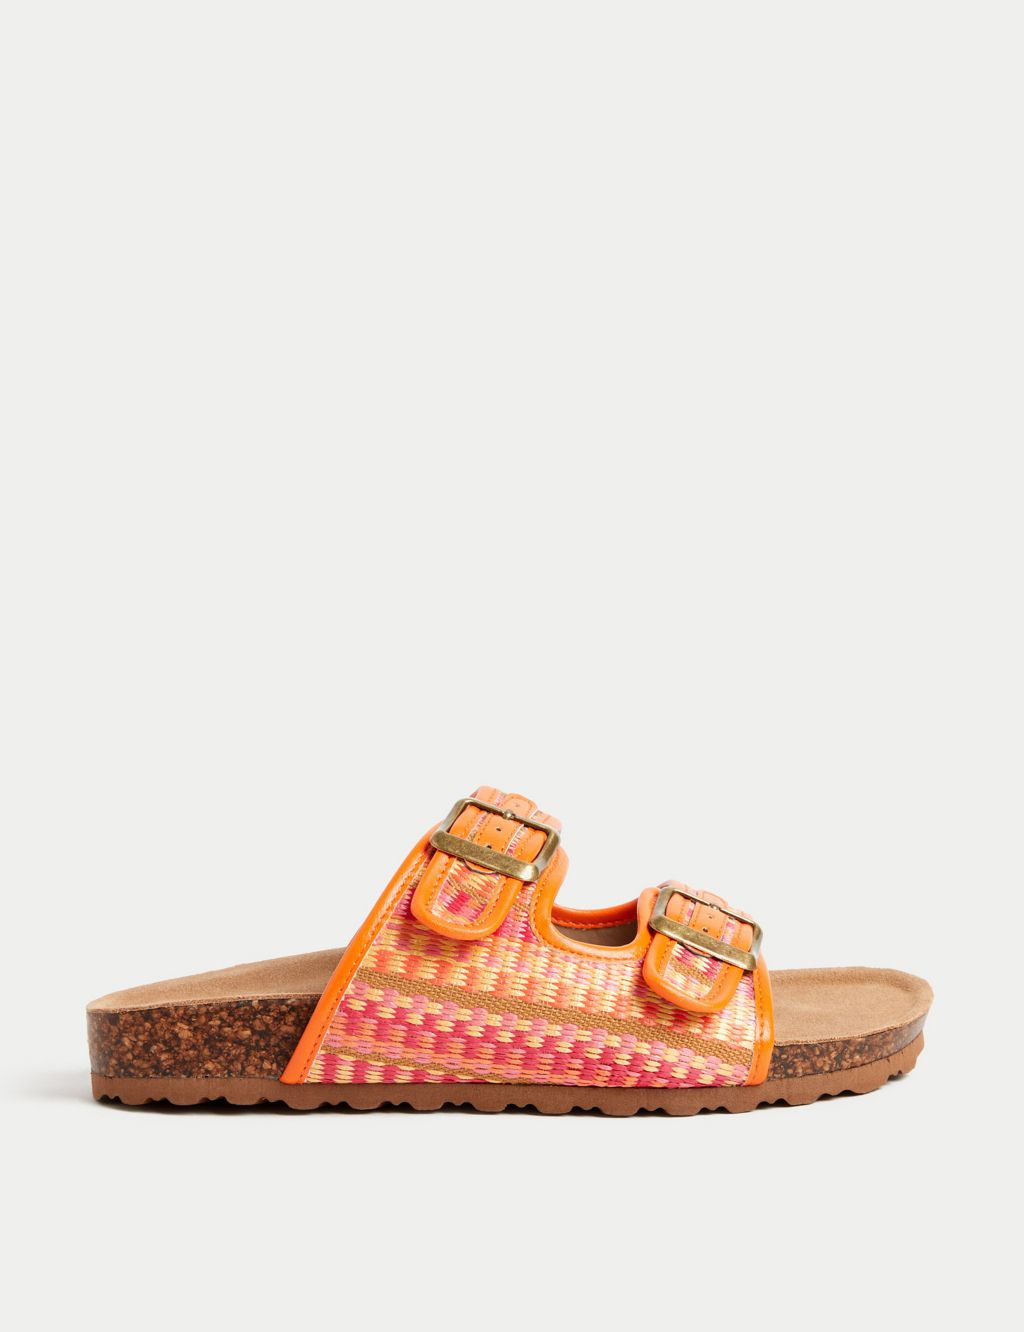 Woven Buckle Footbed Mules image 1